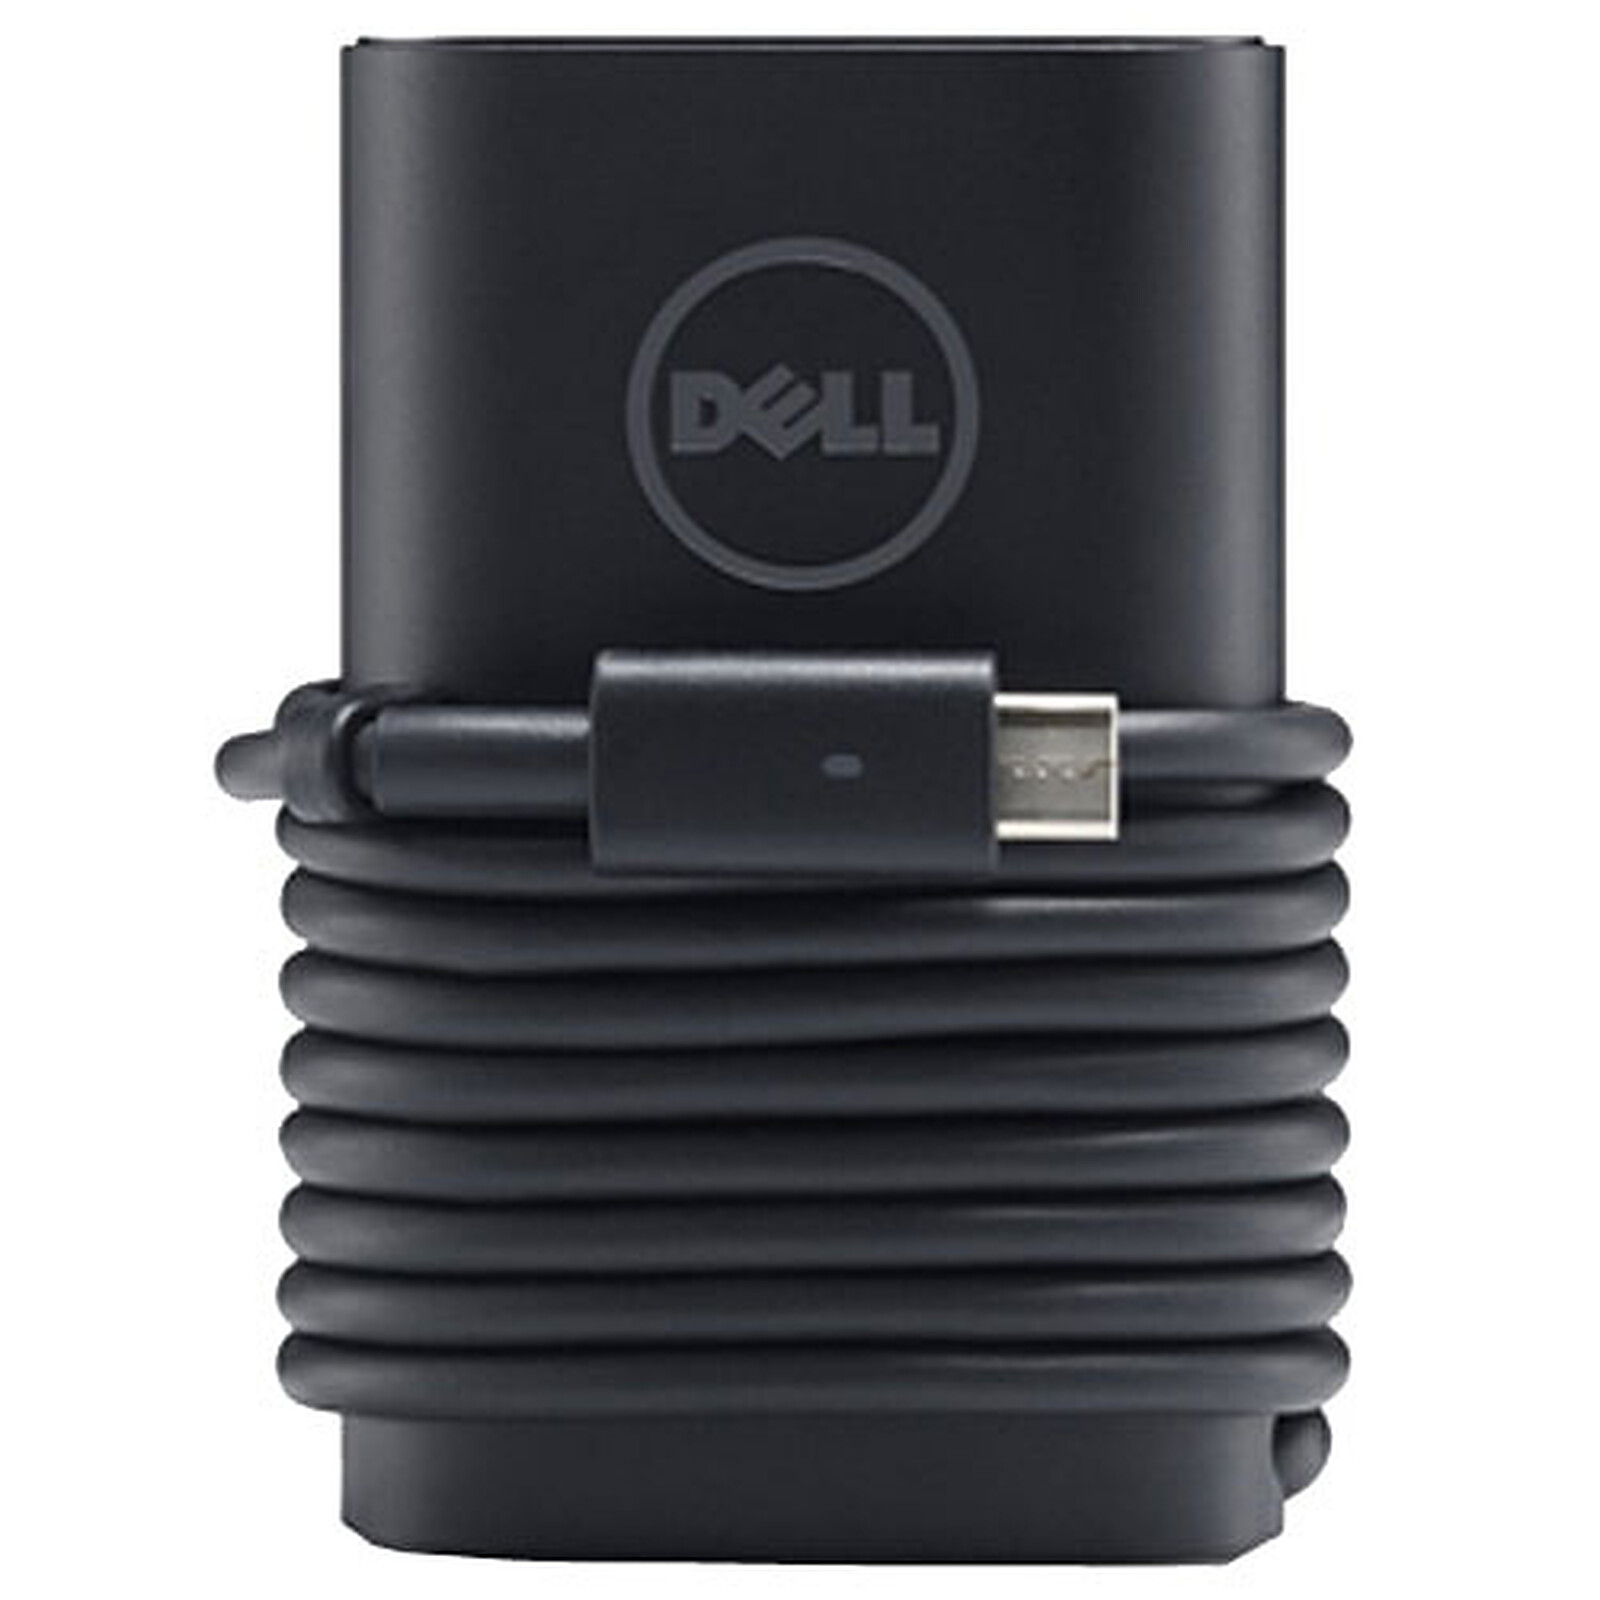 Dell 130W USB-C Power Adapter (TM7MV) - Laptop charger Dell on LDLC